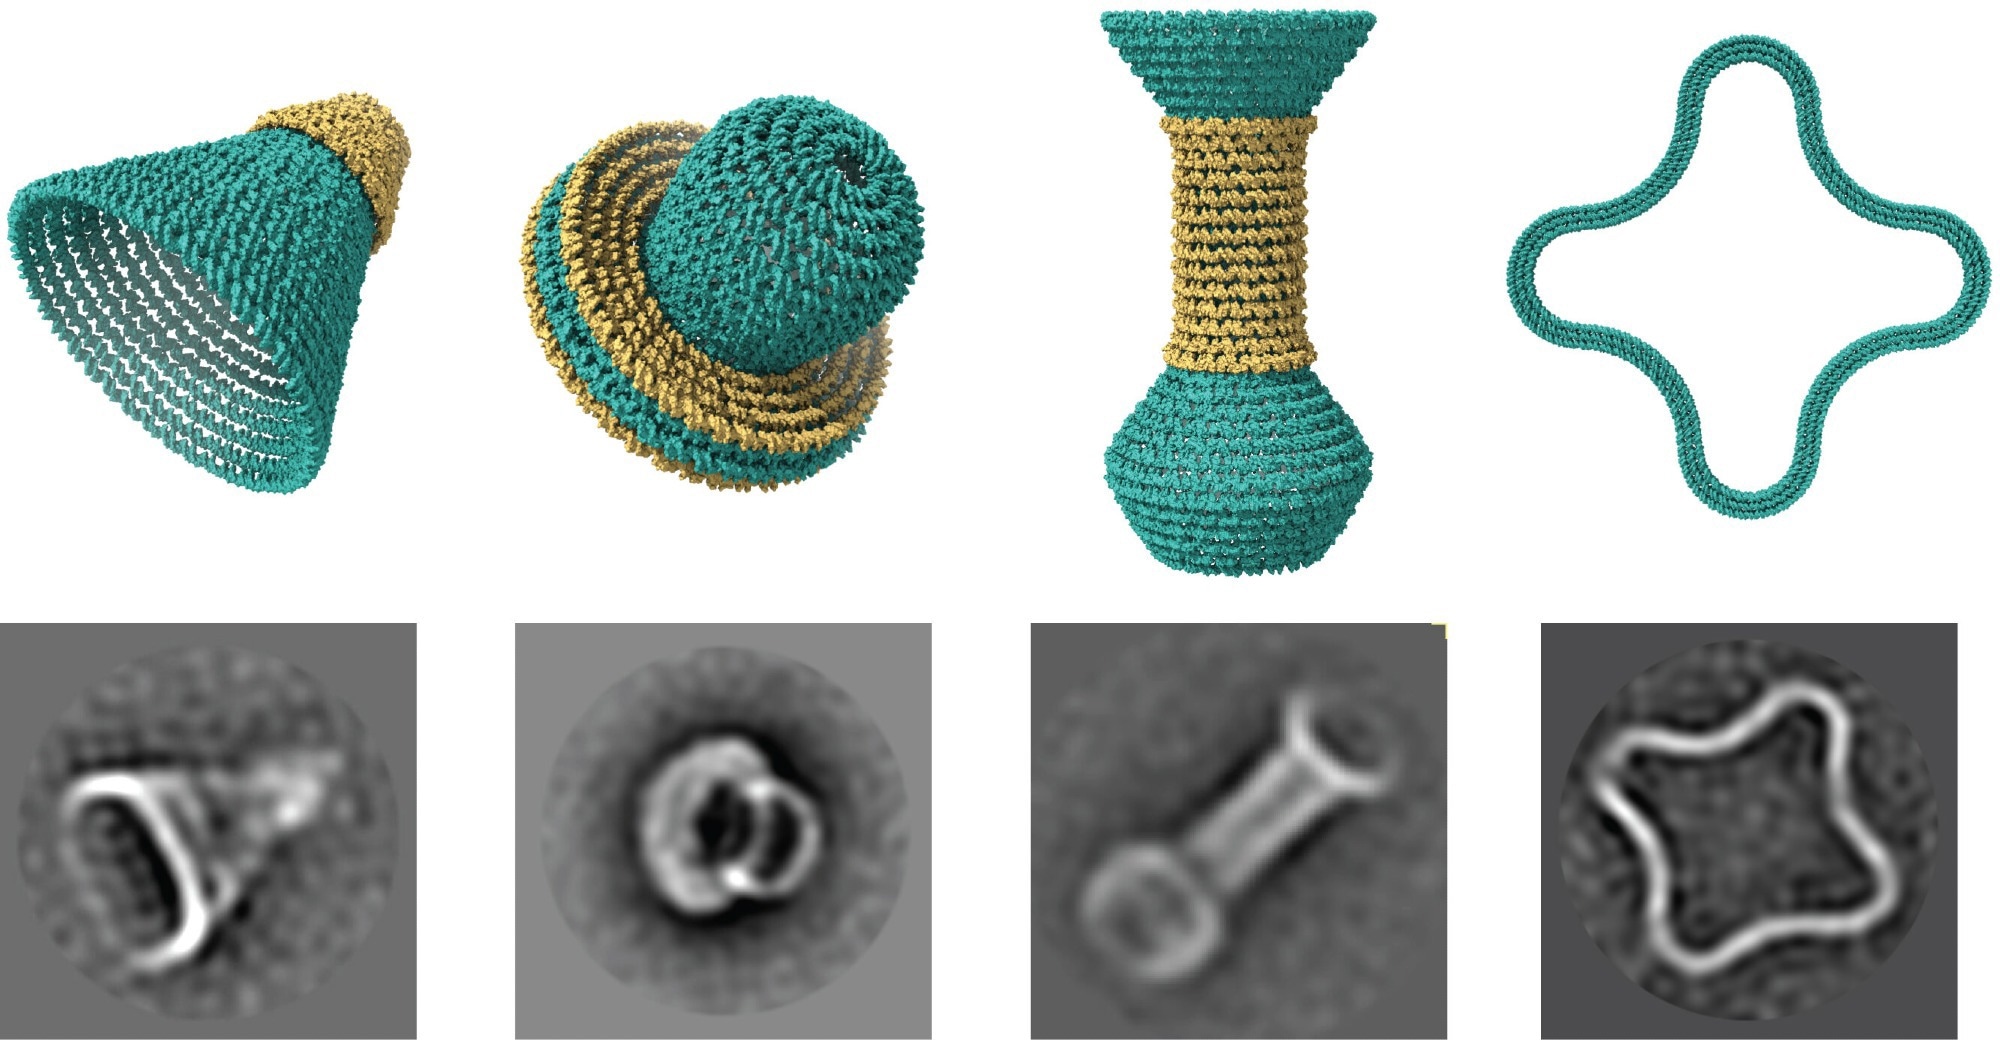 DNA Origami Used to Create Catalog of Nanostructures